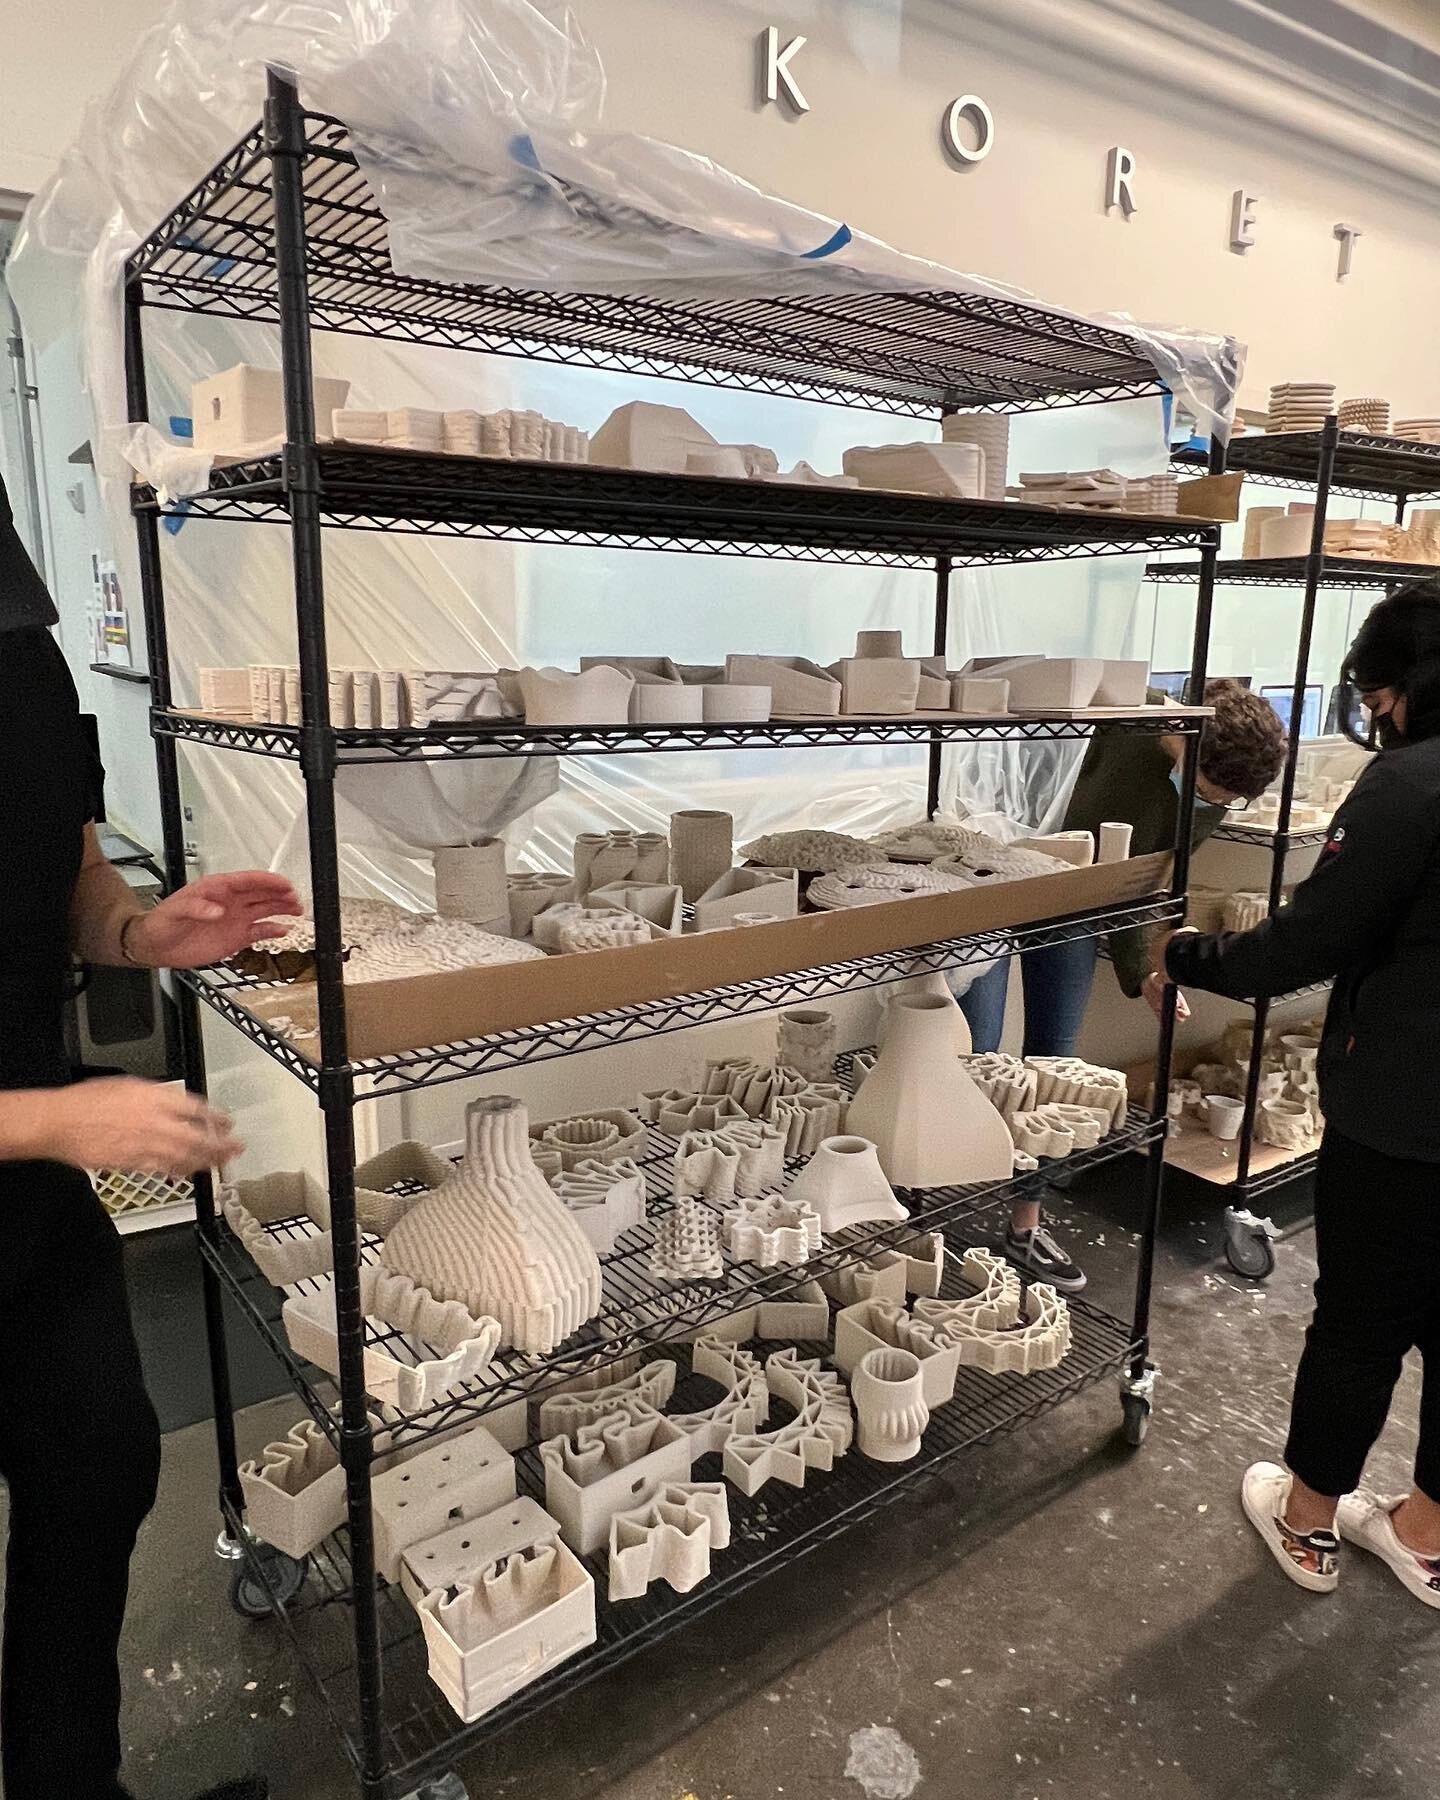 Today: loading the kilns with components designed and fabricated by students in the Ecological Tectonics seminar led by Adam Marcus @radadam. Students are designing modular 3d-printed ceramic systems that serve as habitats for a variety of plants and